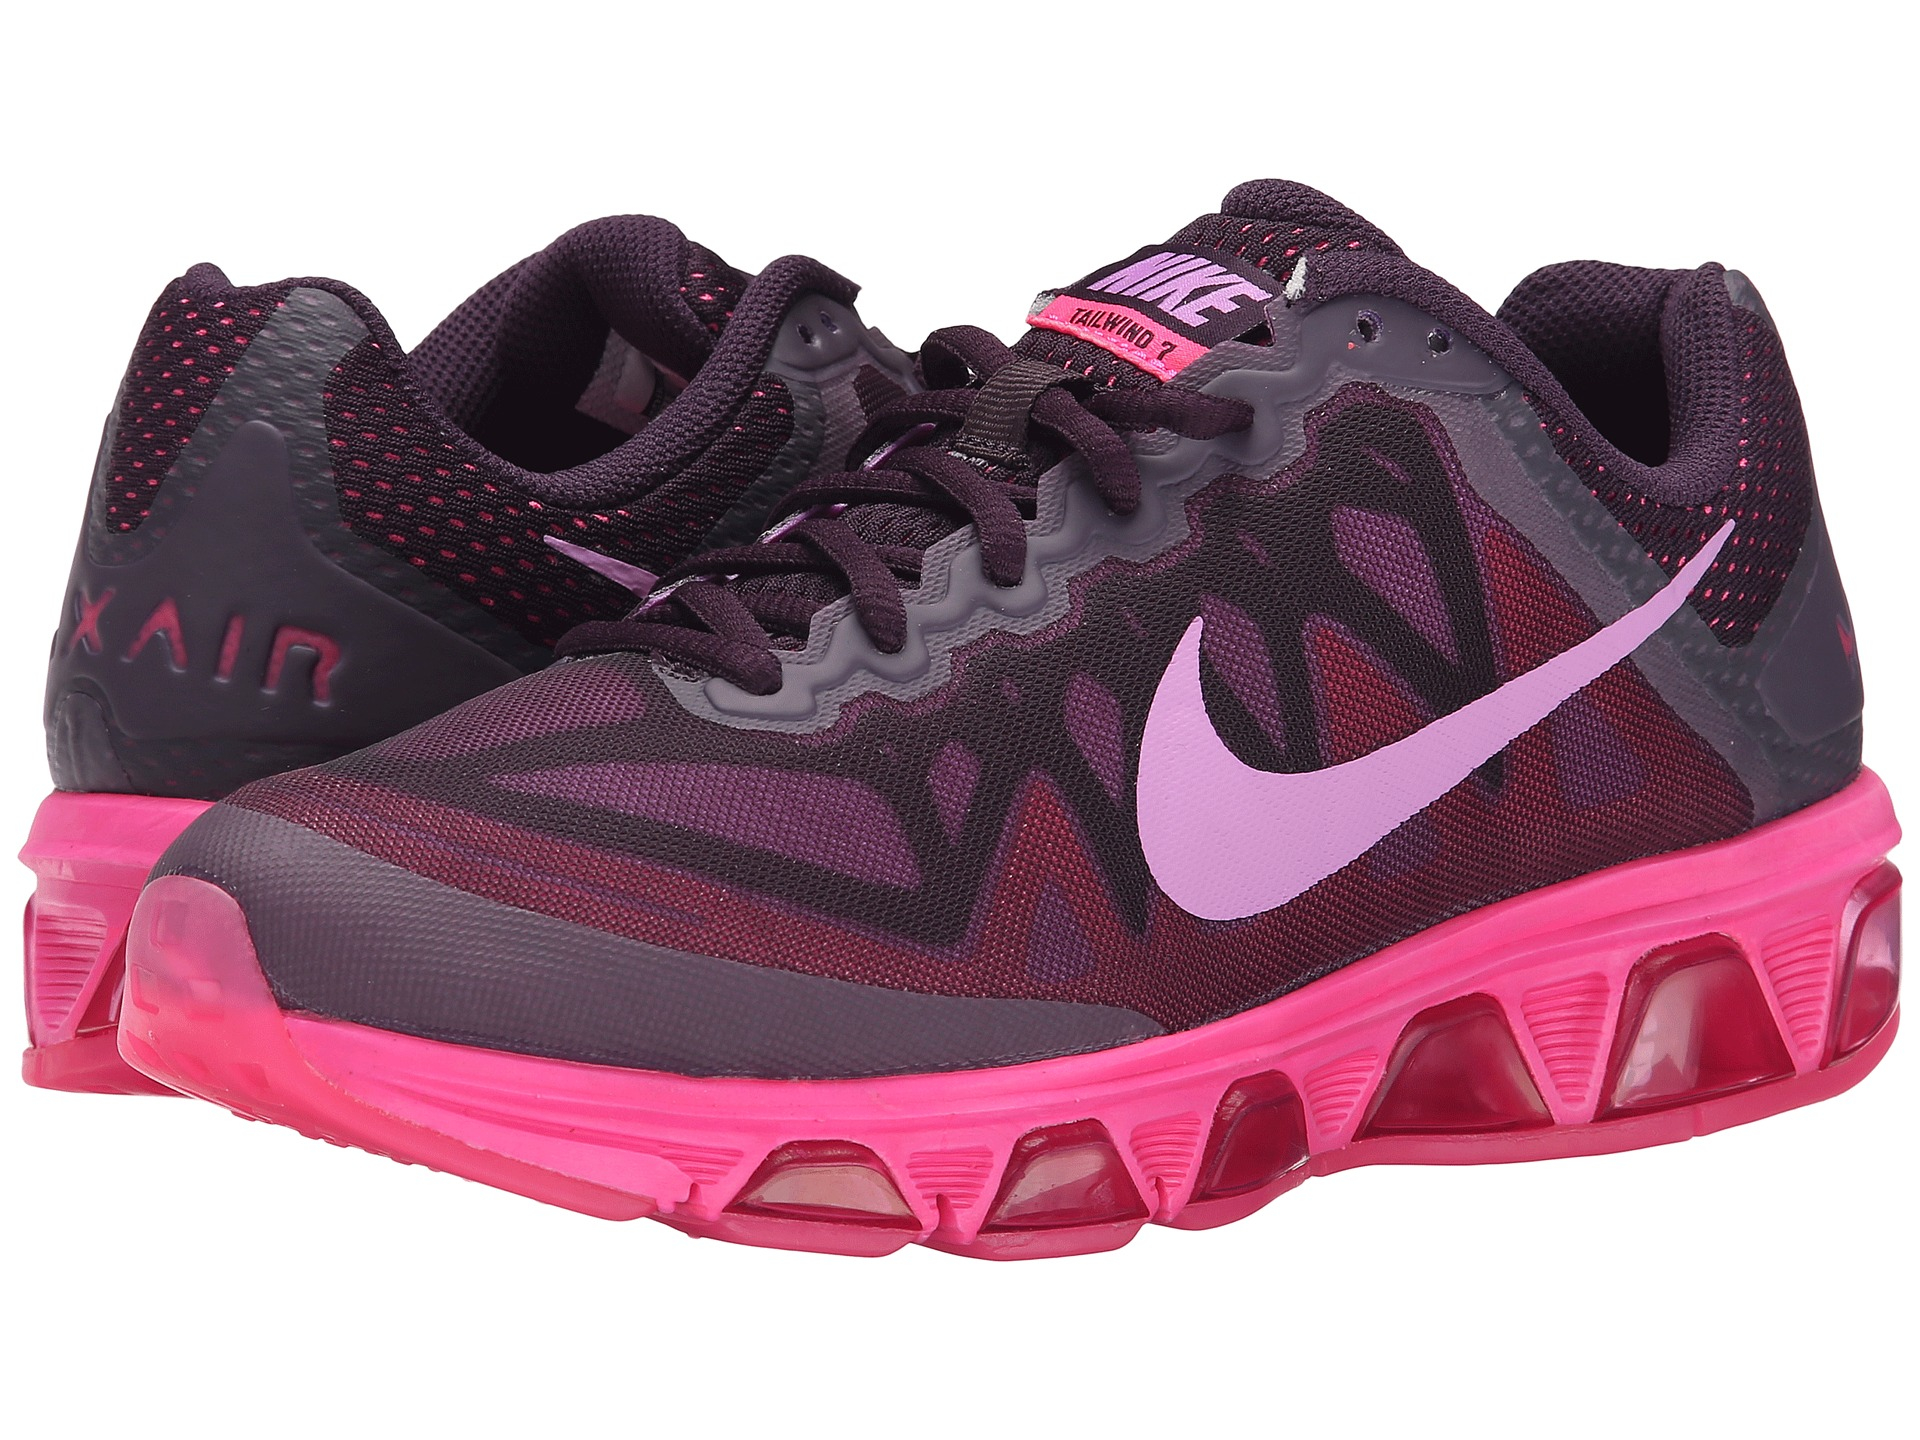 Nike Air Max Tailwind 7 in Pink - Lyst